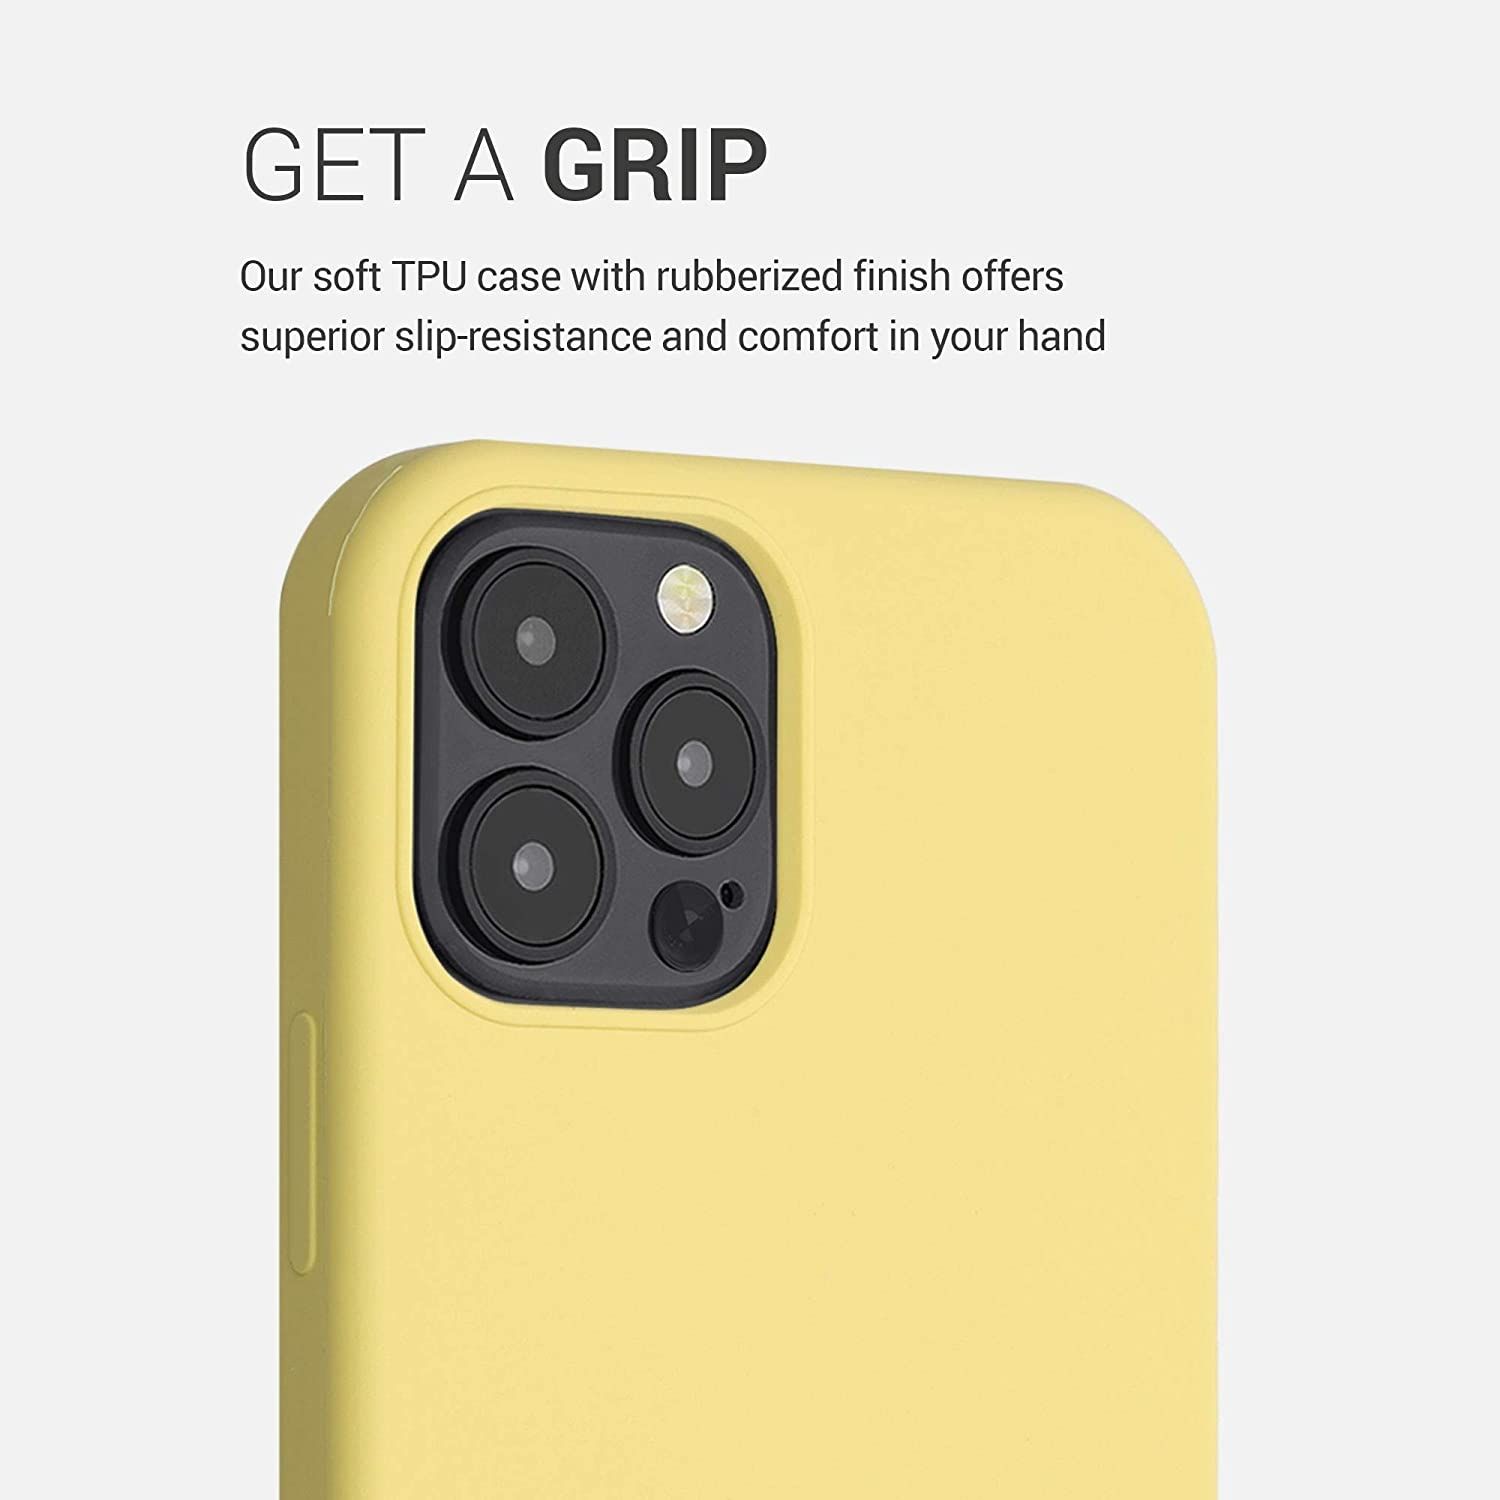 kw-mobile-thiki-silikonis-apple-iphone-12-12-pro-soft-flexible-rubber-cover-yellow-matte-52641.49-2.jpg